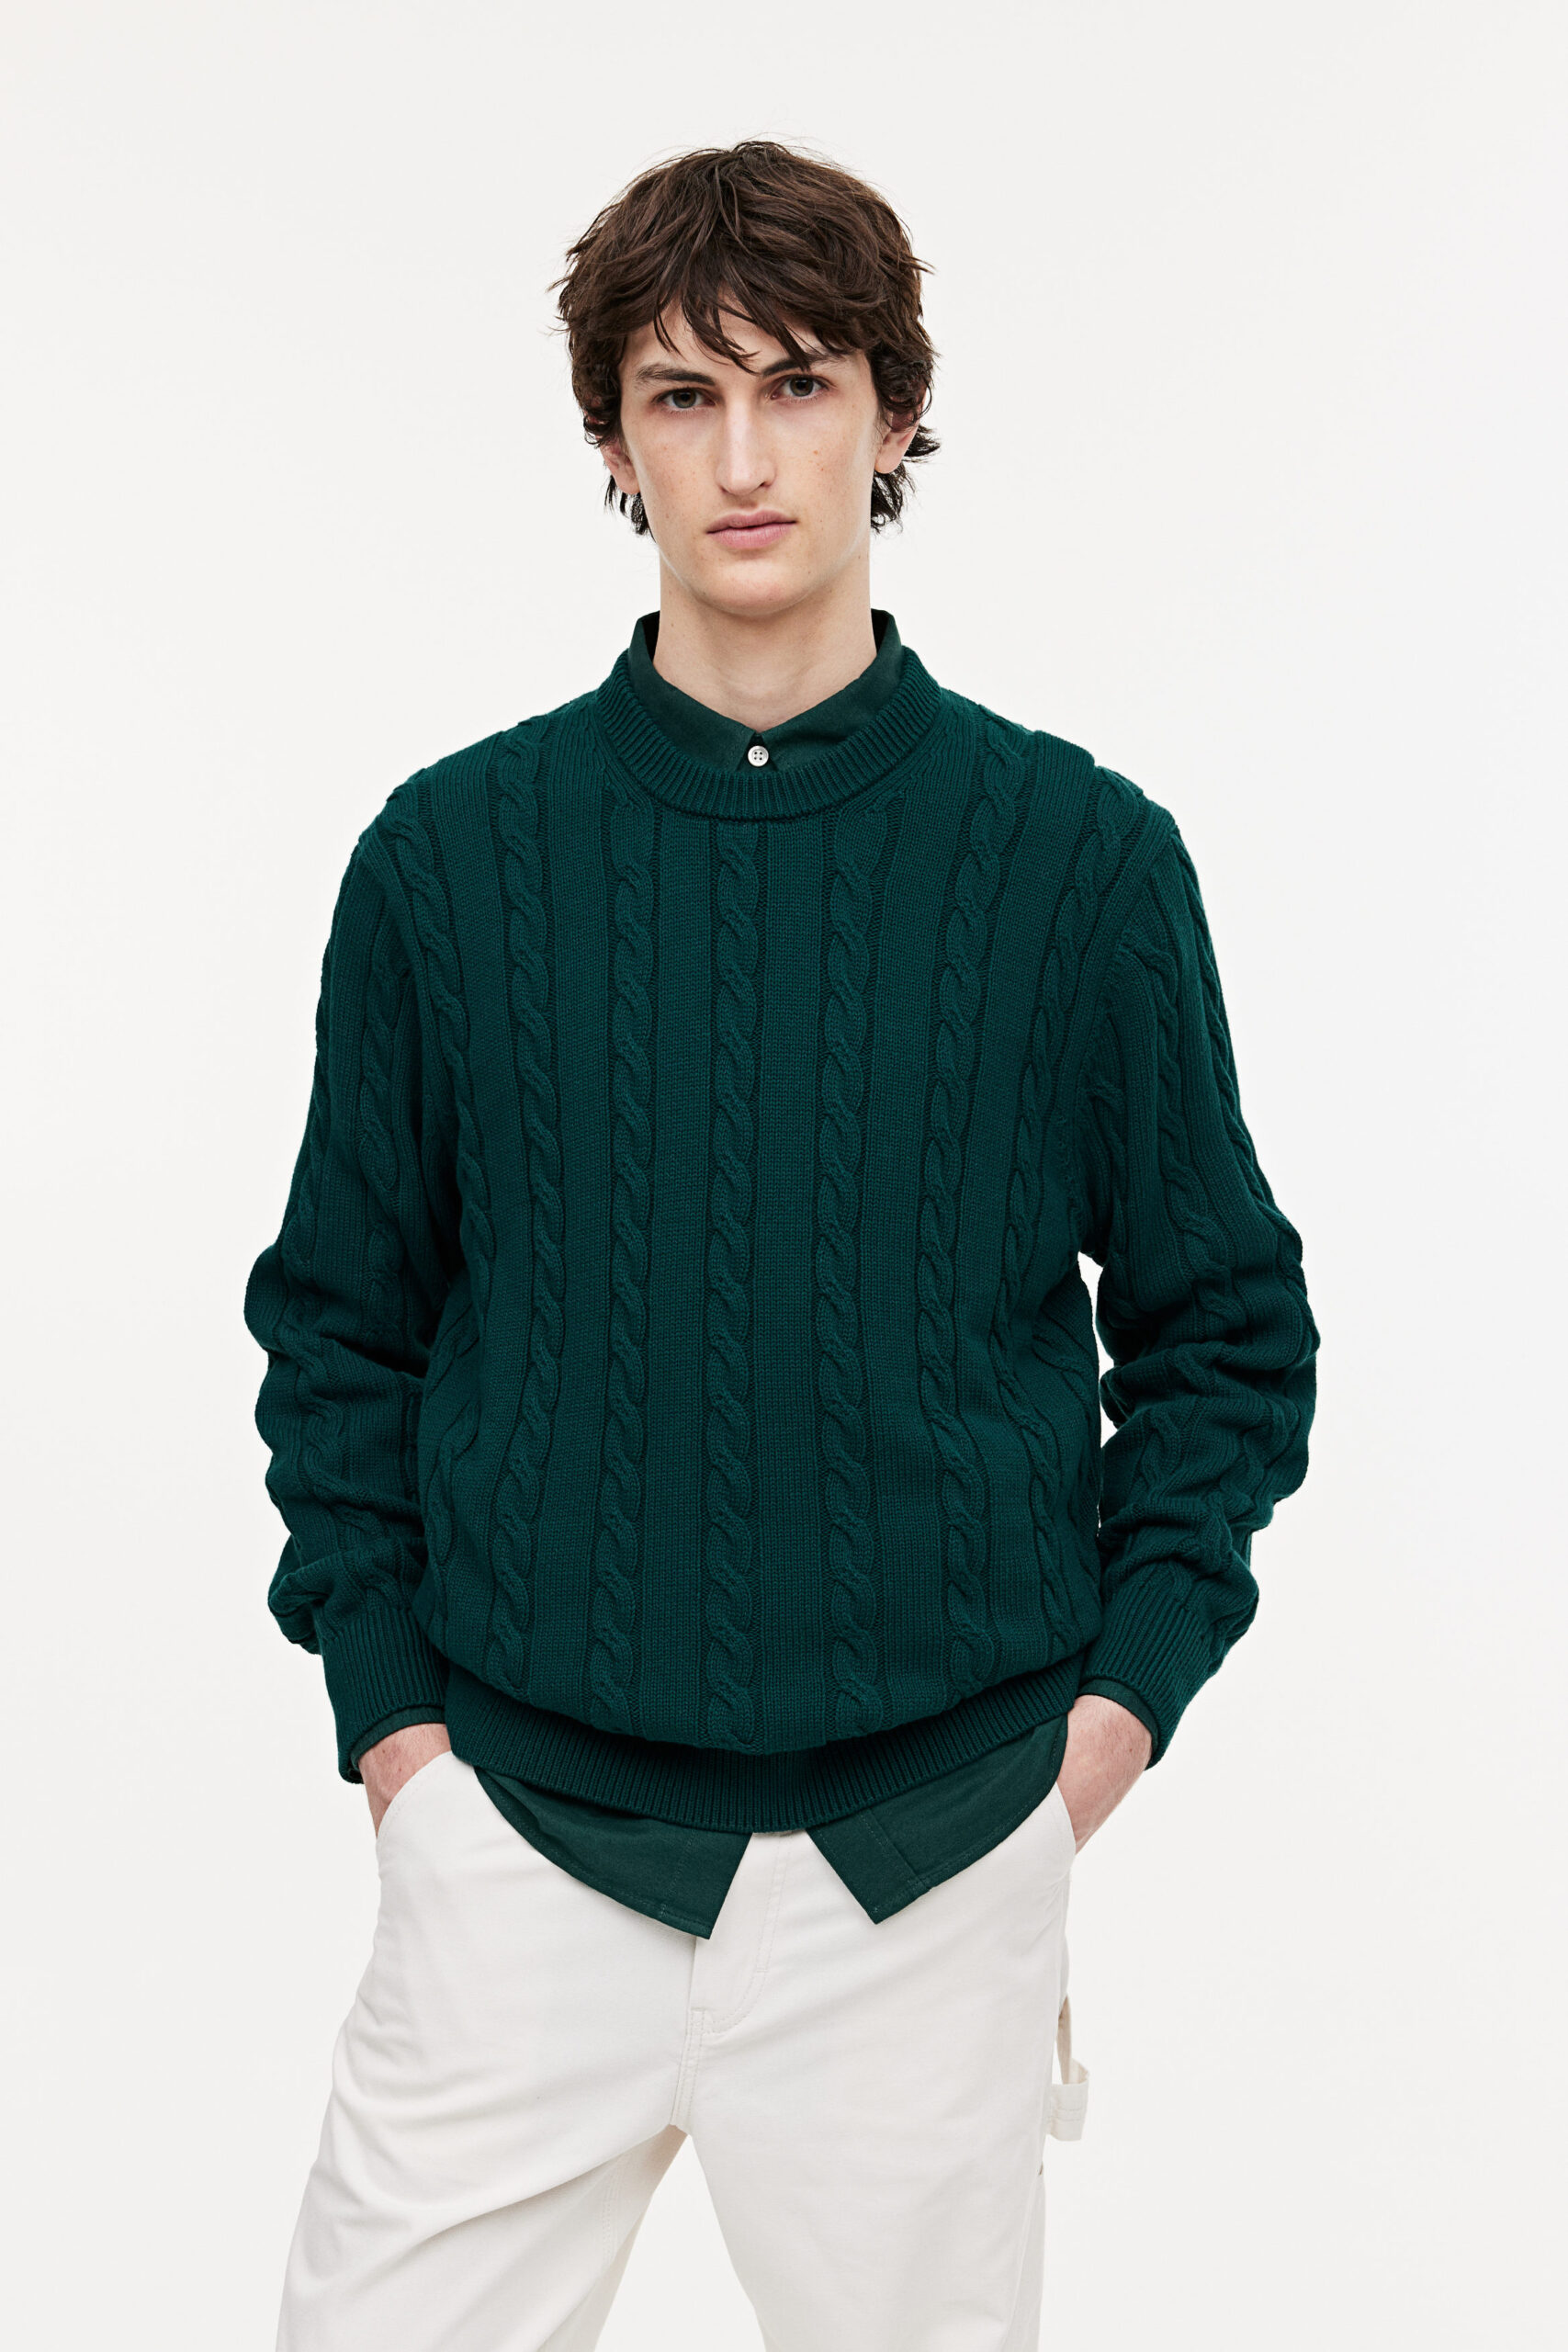 man wearing green knit sweater over a button up shirt with white pants